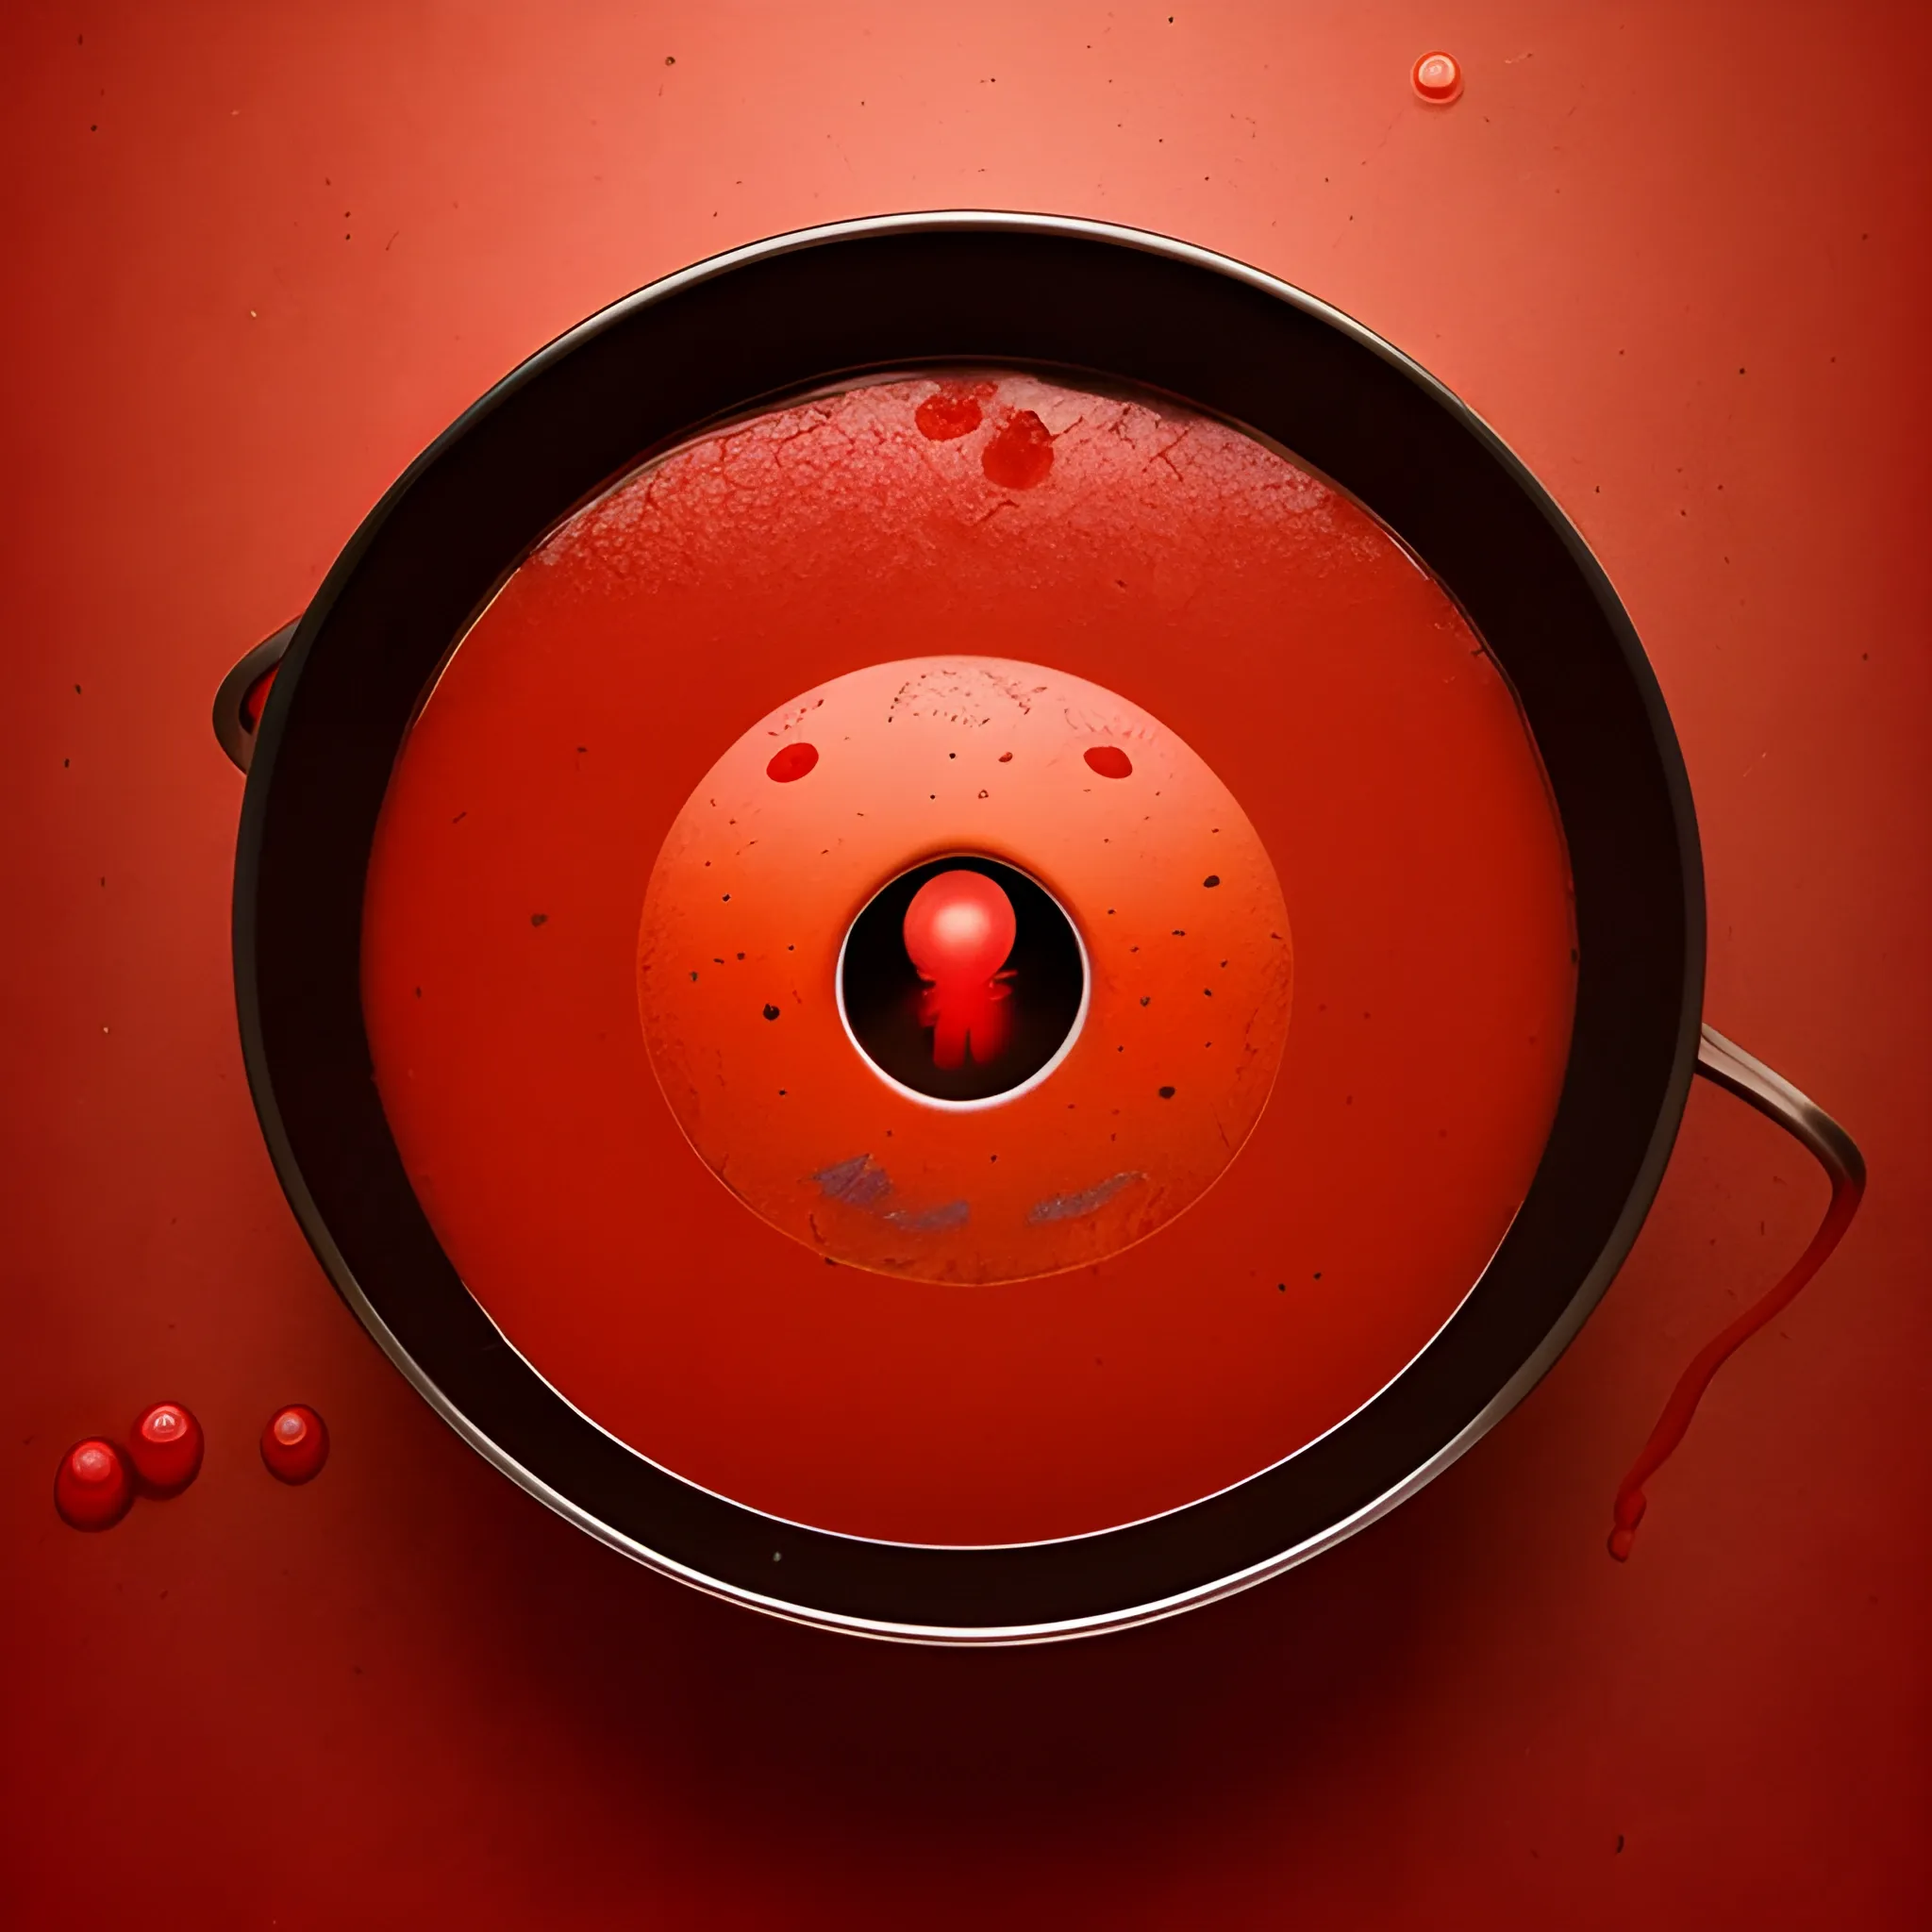 humanized red paper falls in the Mexican red boiling soup, view from above on the same level as second pepper that watches as first pepper falls. Both are sad, Both have faces. Digital art, great quality, UHD, top artist, famous artist work
